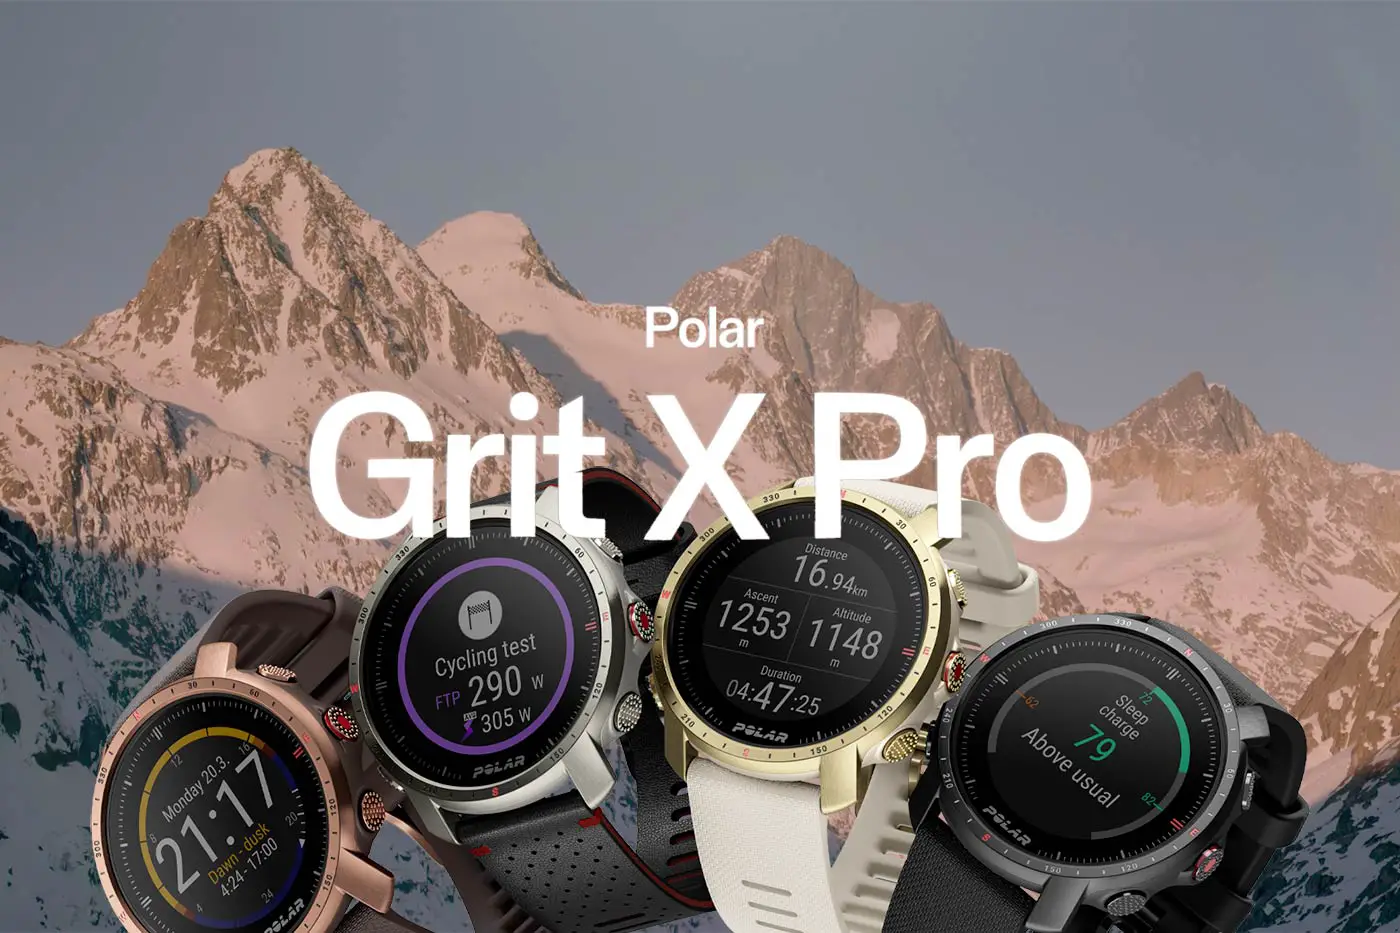 The new Polar Grit X Pro — Premium finish and higher performance